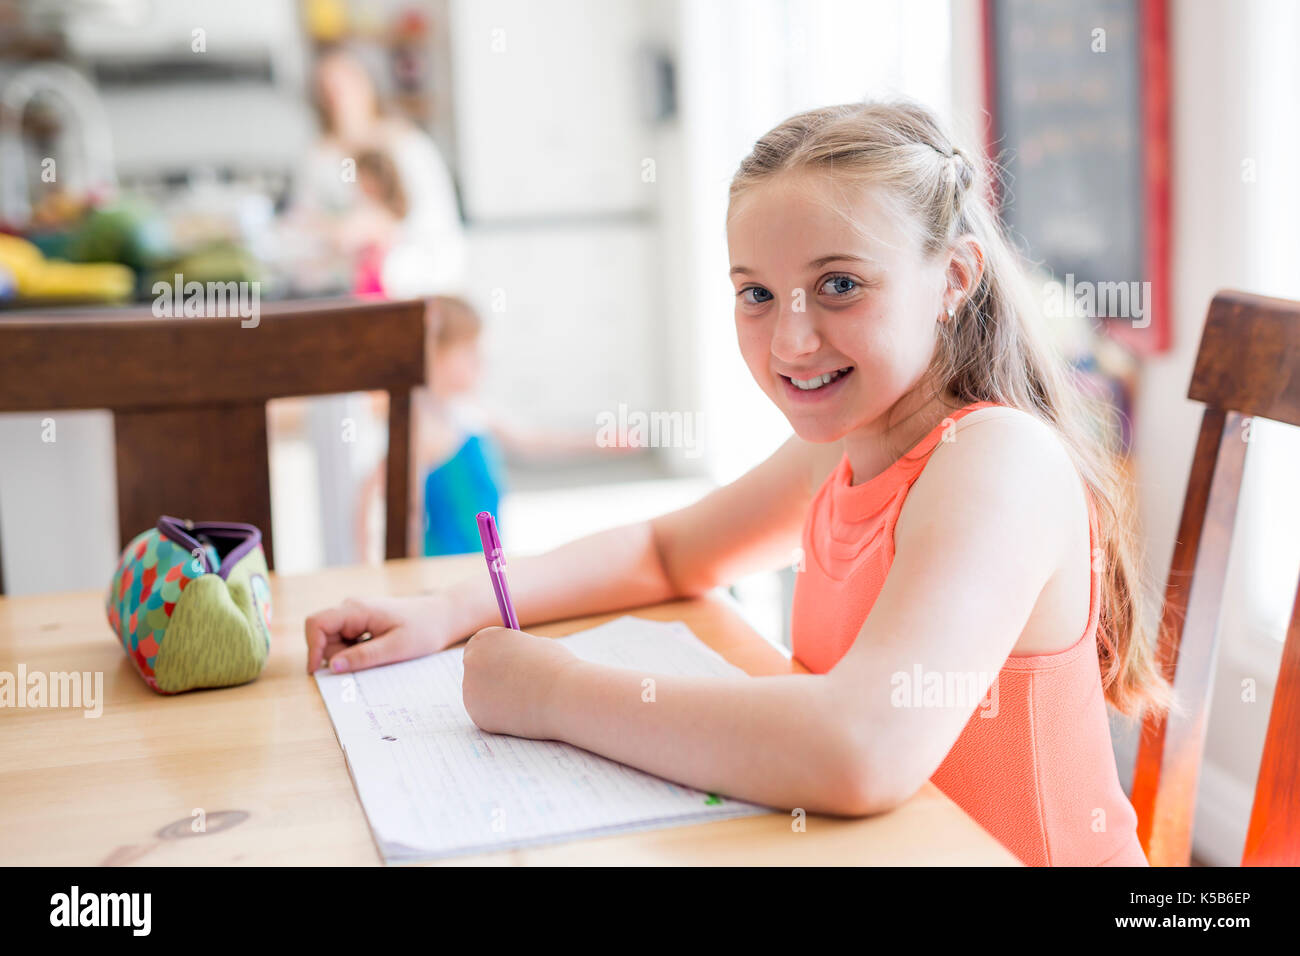 Cute girl doing homework at home Banque D'Images